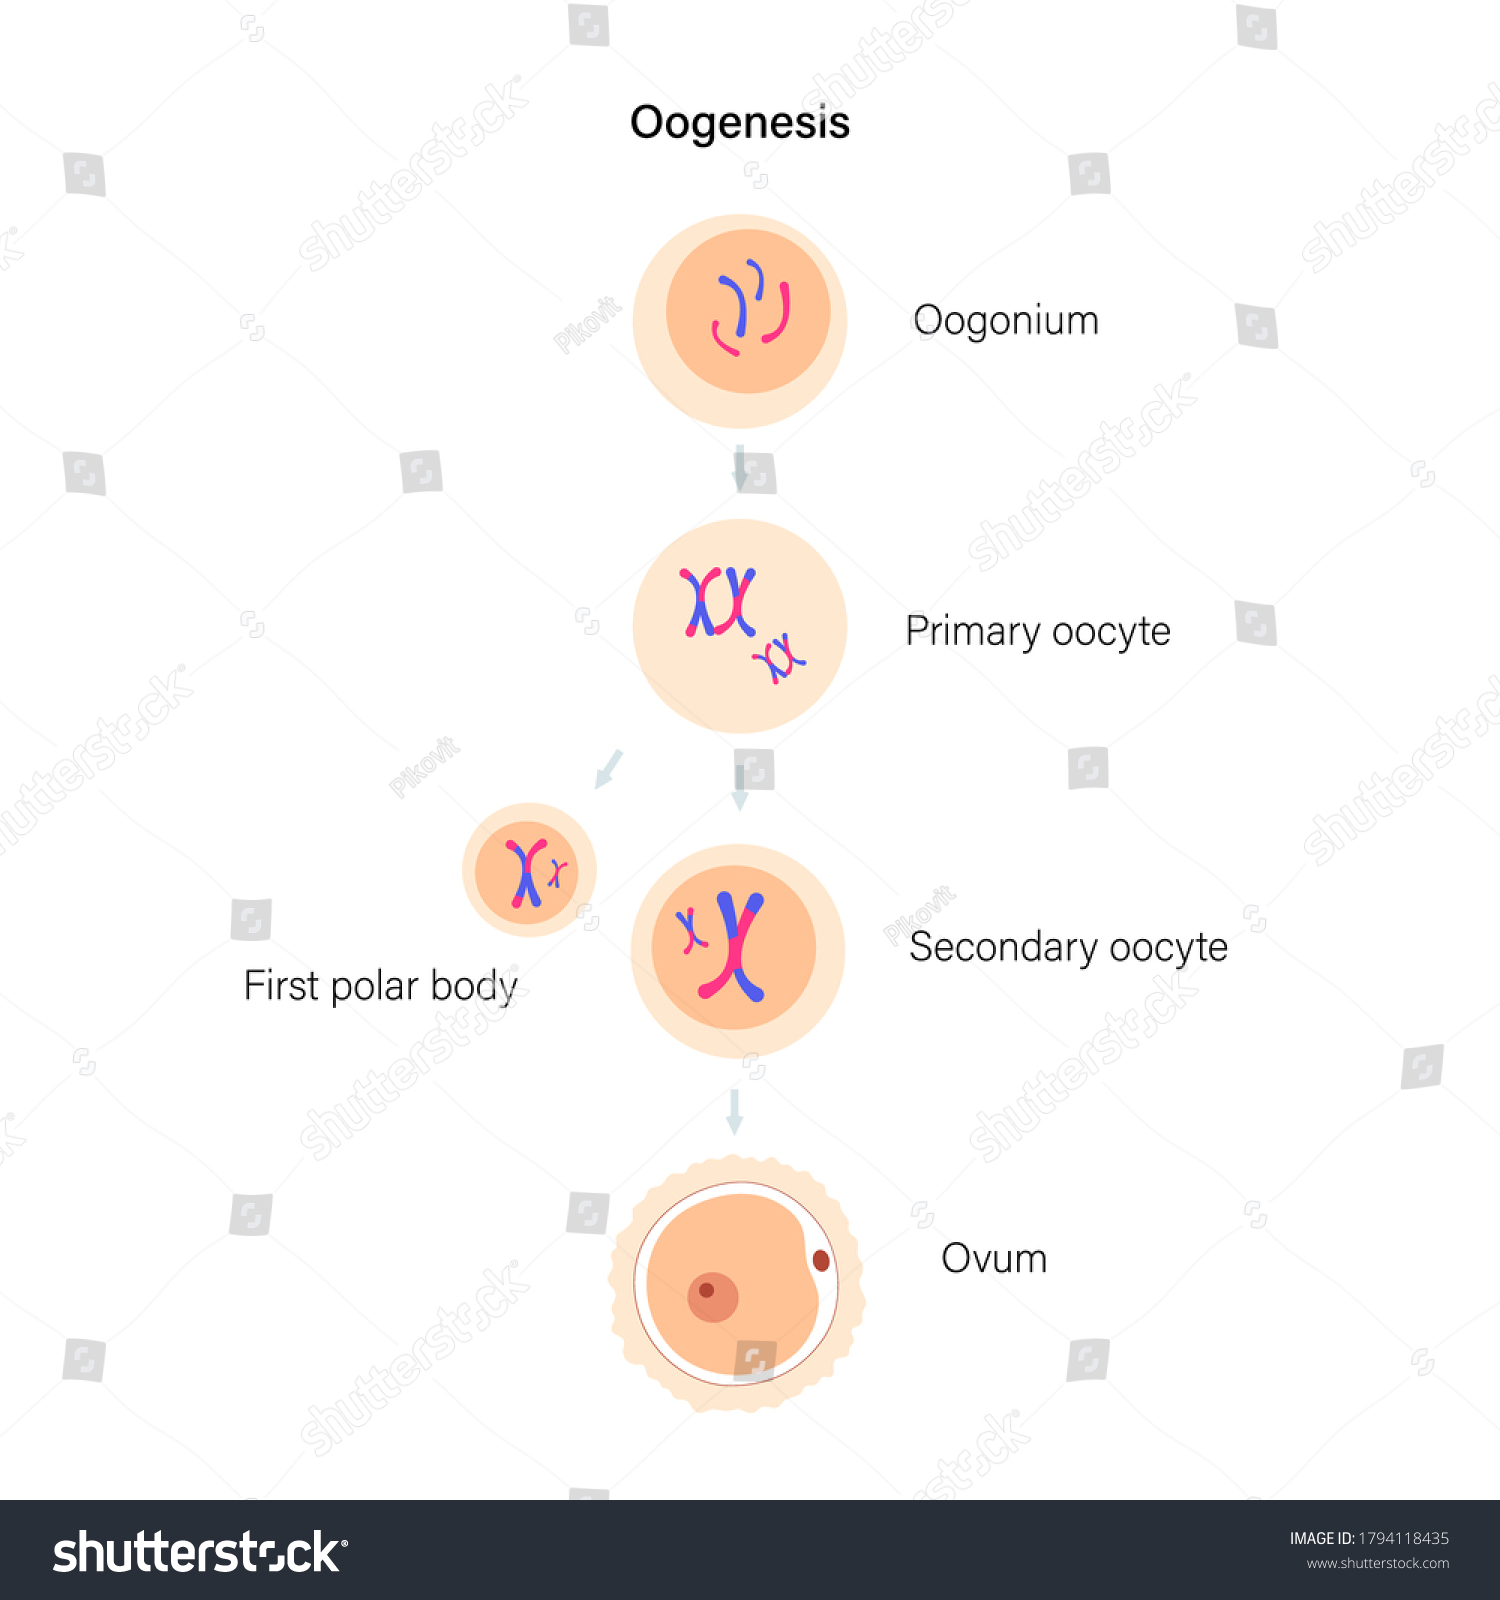 Oogenesis Cell Division Diploid Cells Dna Stock Vector Royalty Free 1794118435 Shutterstock 